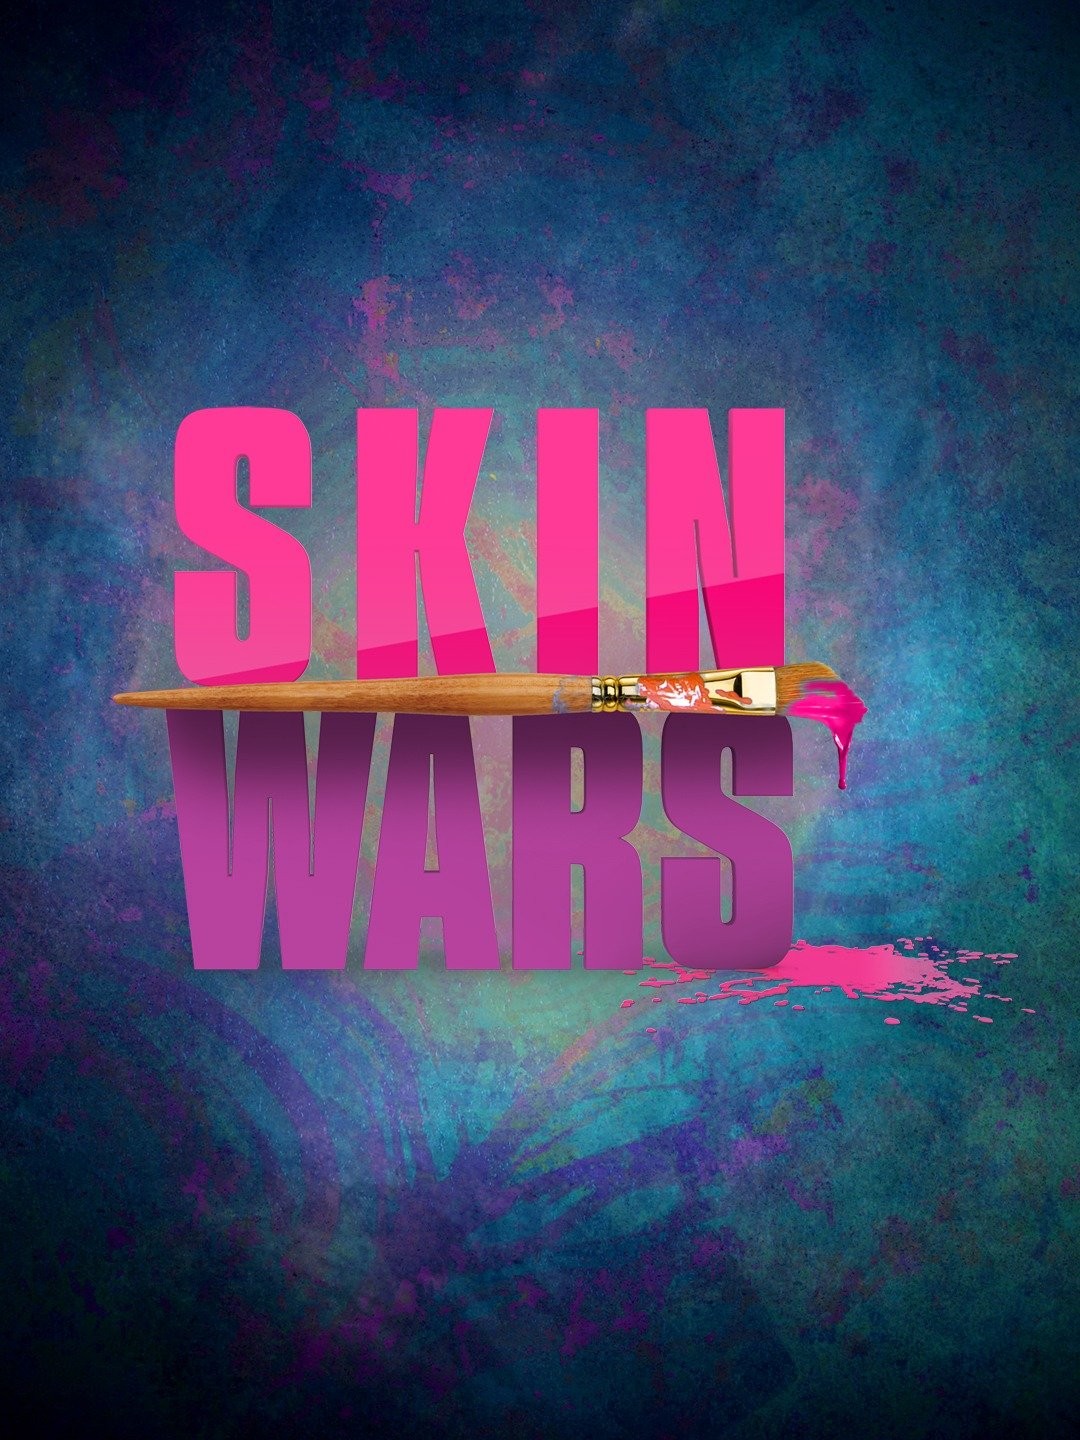 Watch 'Skin Wars' Season 3 episode 1 live: Contestants body paint dancers  for first challenge; meet the entire cast - IBTimes India